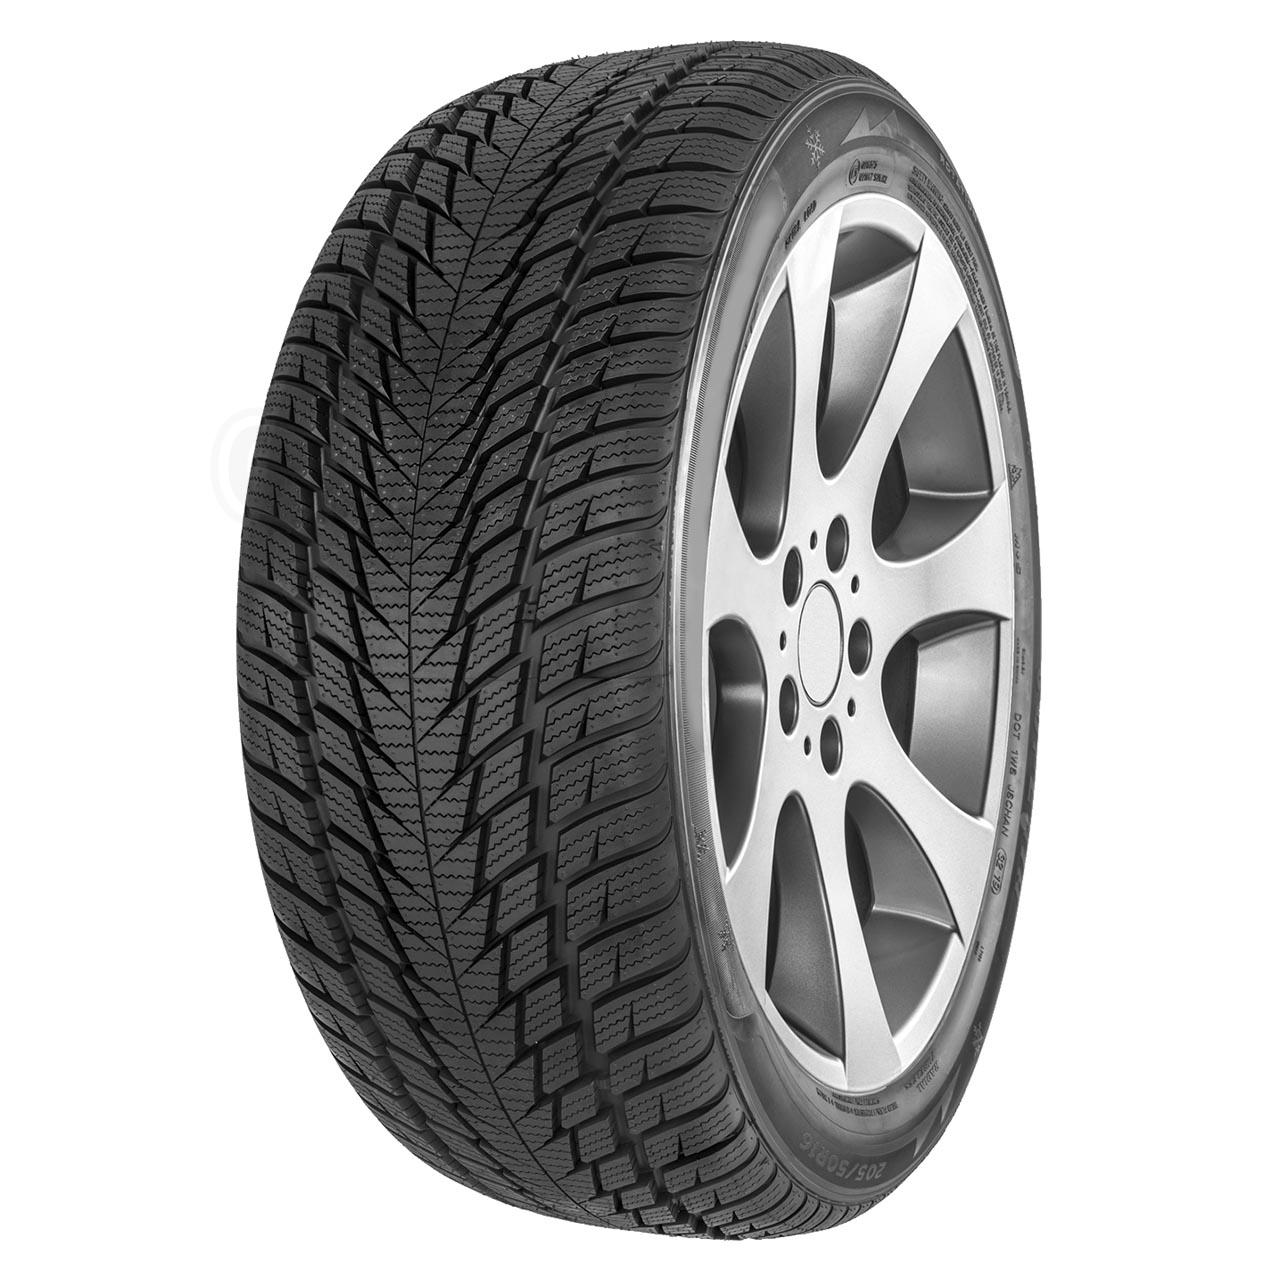 Fortuna Gowin UHP 2 255/45R18 103V XL